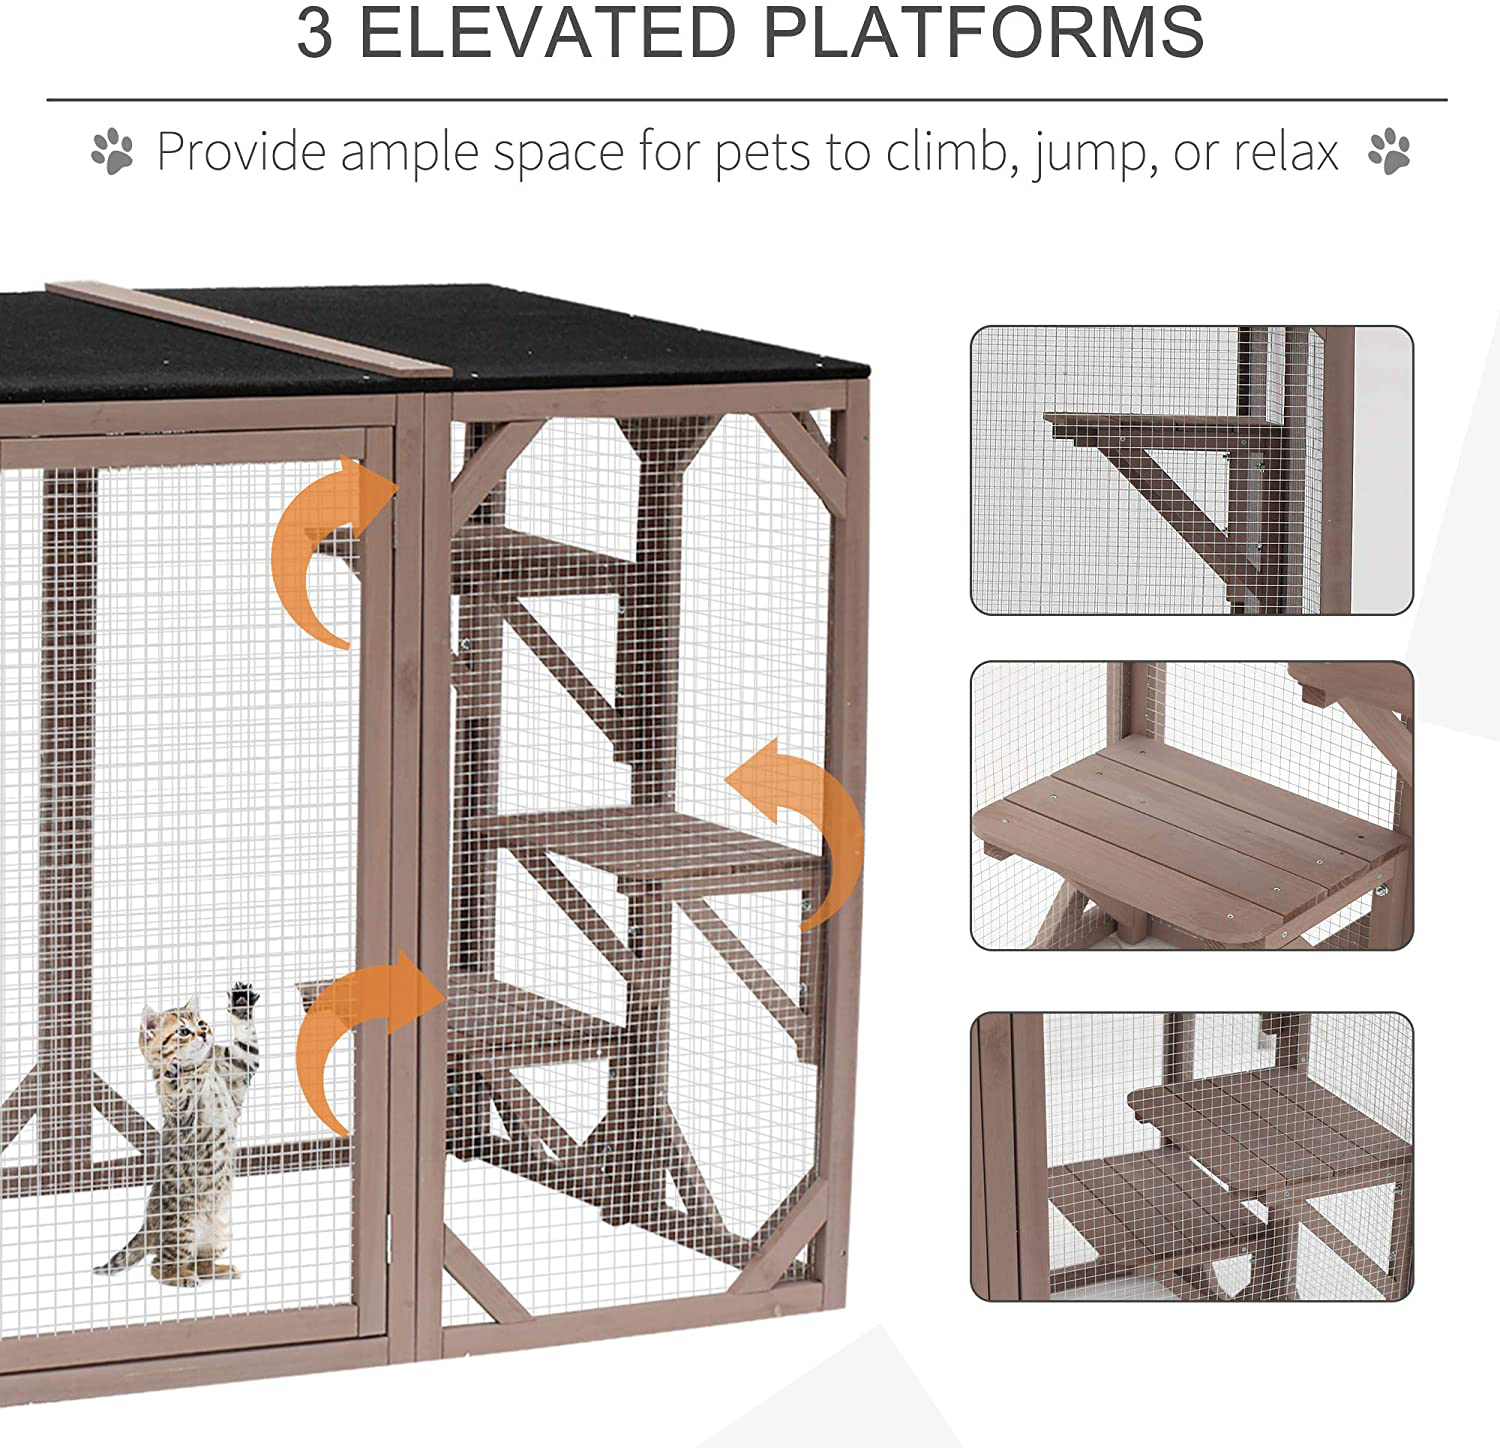 Pawhut 71" X 32" X 44" Large Wooden Outdoor Cat Enclosure Catio Cage with 3 Platforms